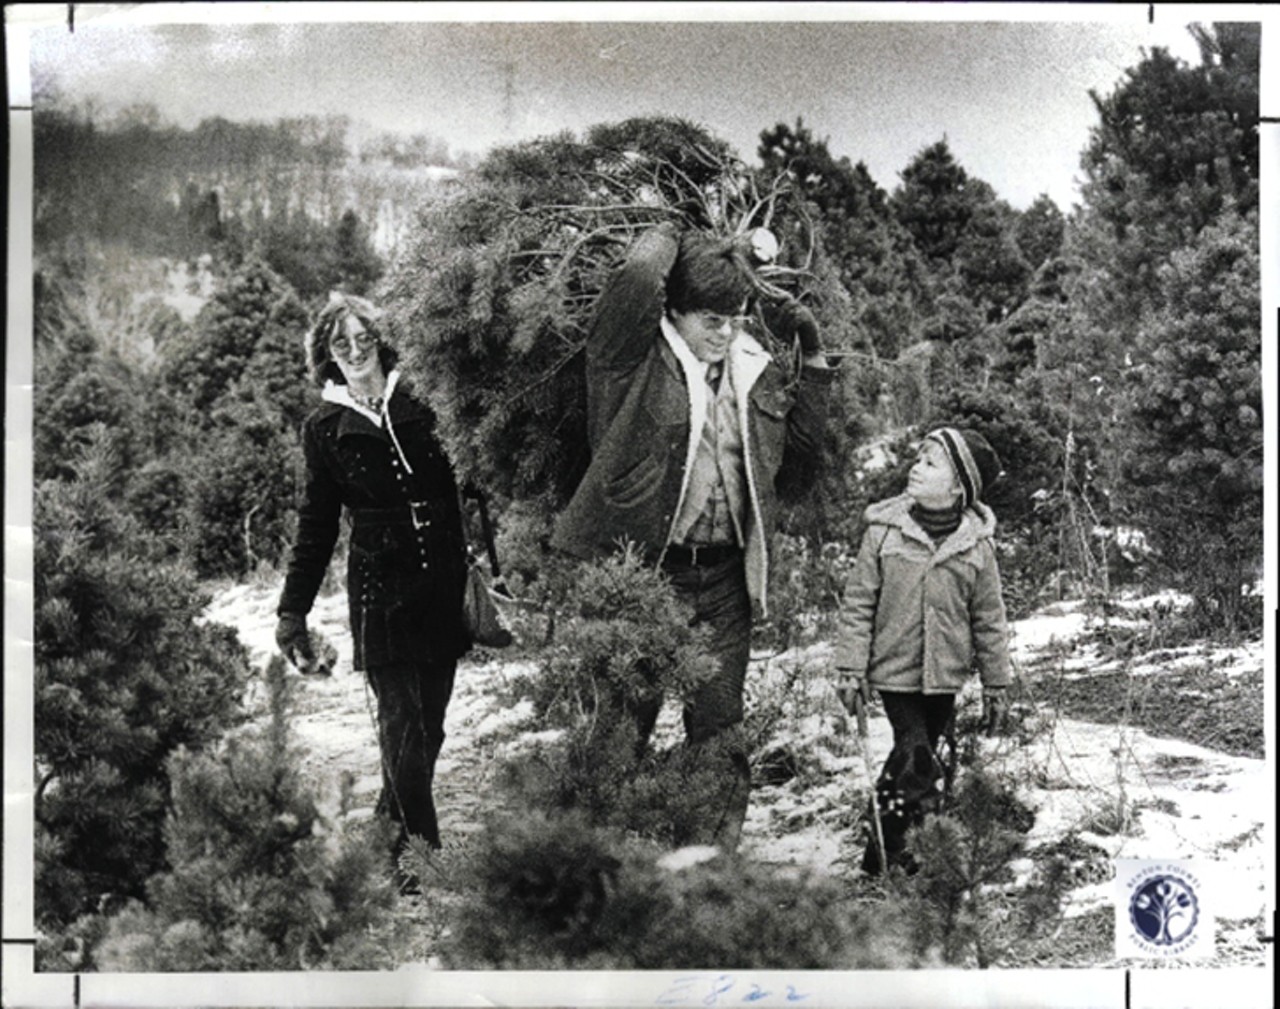 Northern Kentucky, 1977
"Helen, John & Dennis (6 yr) Lutz cutting their own Christmas tree at Dixie Pines (30 acres of trees on Rt. 547 at 1-40 Ft. ?) John owns own Co. N.K. Solitron, distributors of solar equipment."